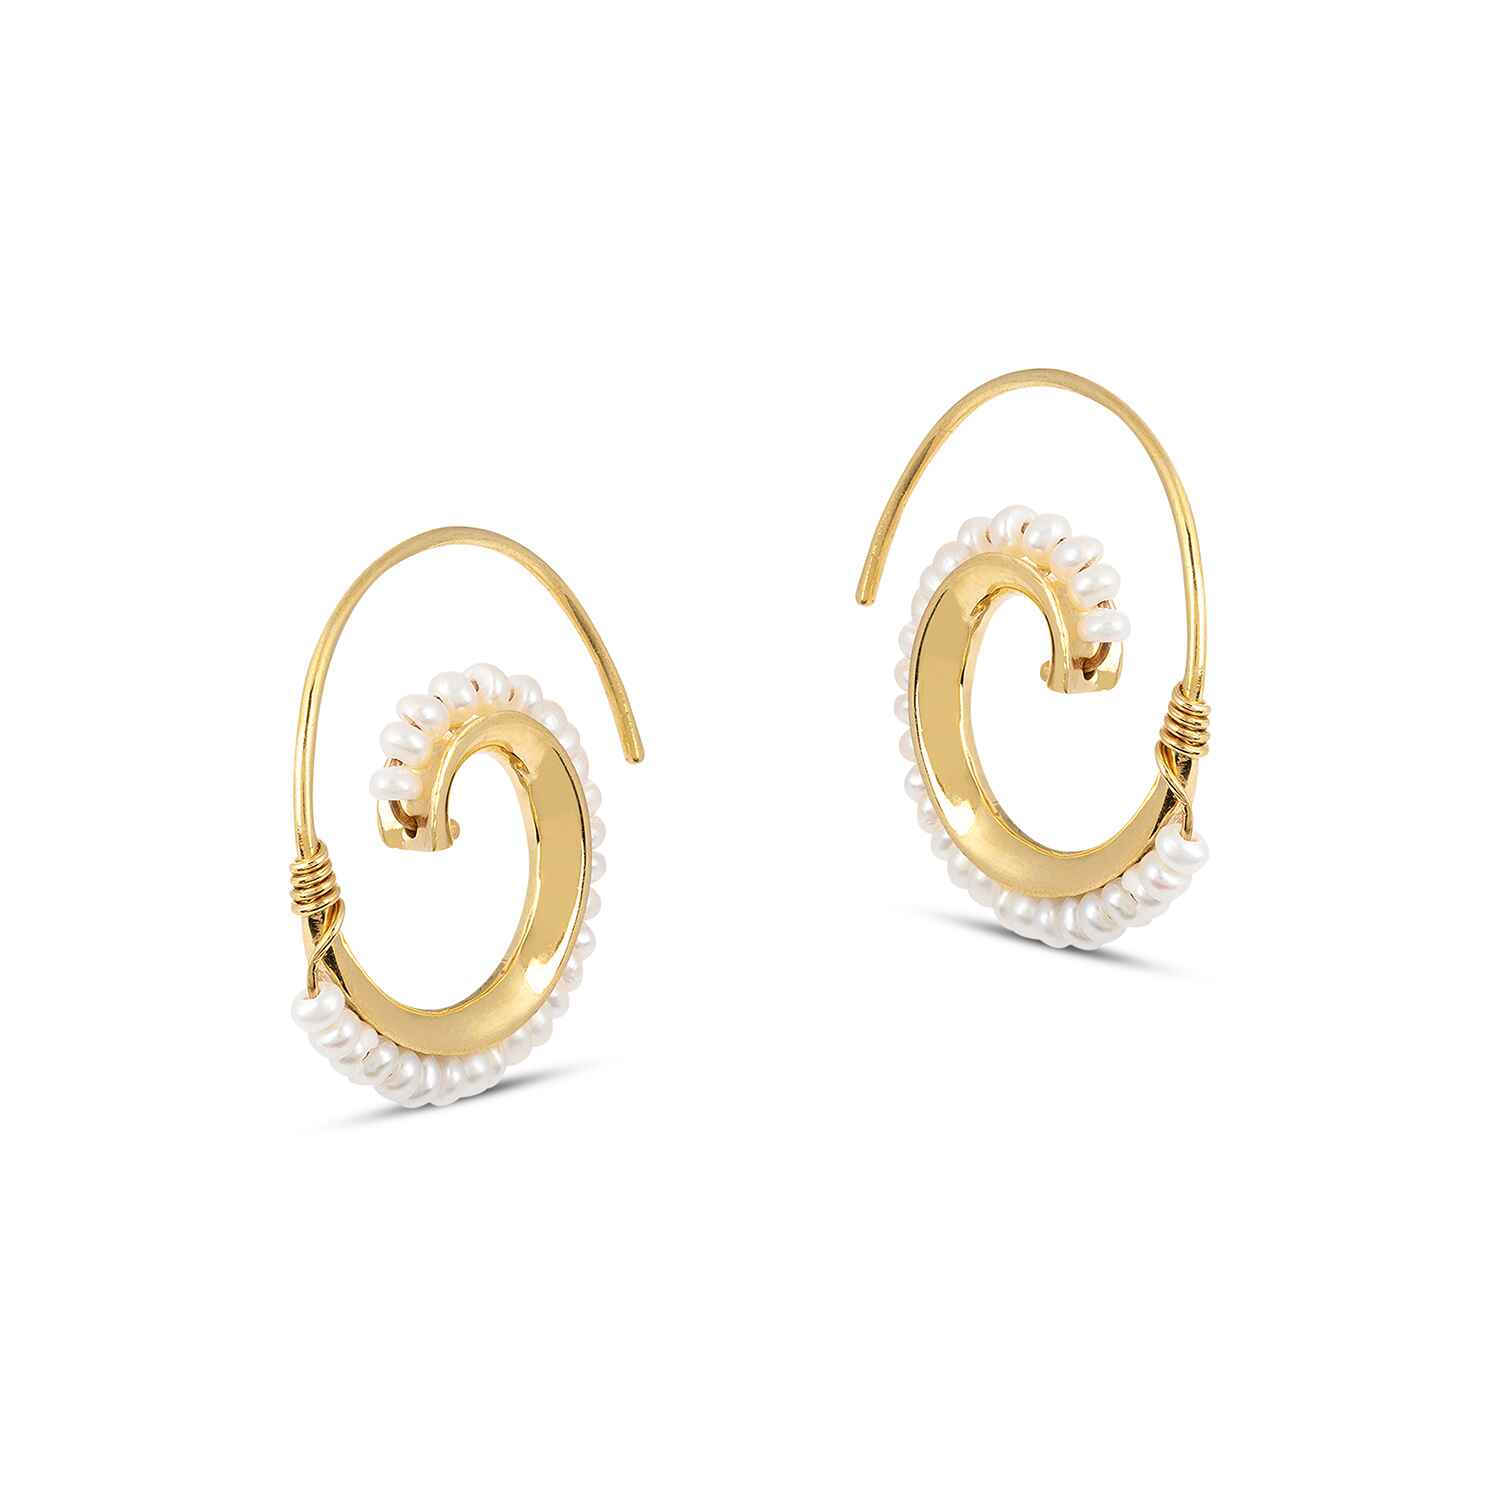 Meet the Venus Pearl Shell Earrings, our signature sustainable jewellery piece. Gorgeous vintage white pearls handwrapped around a shell shaped gold hoop.